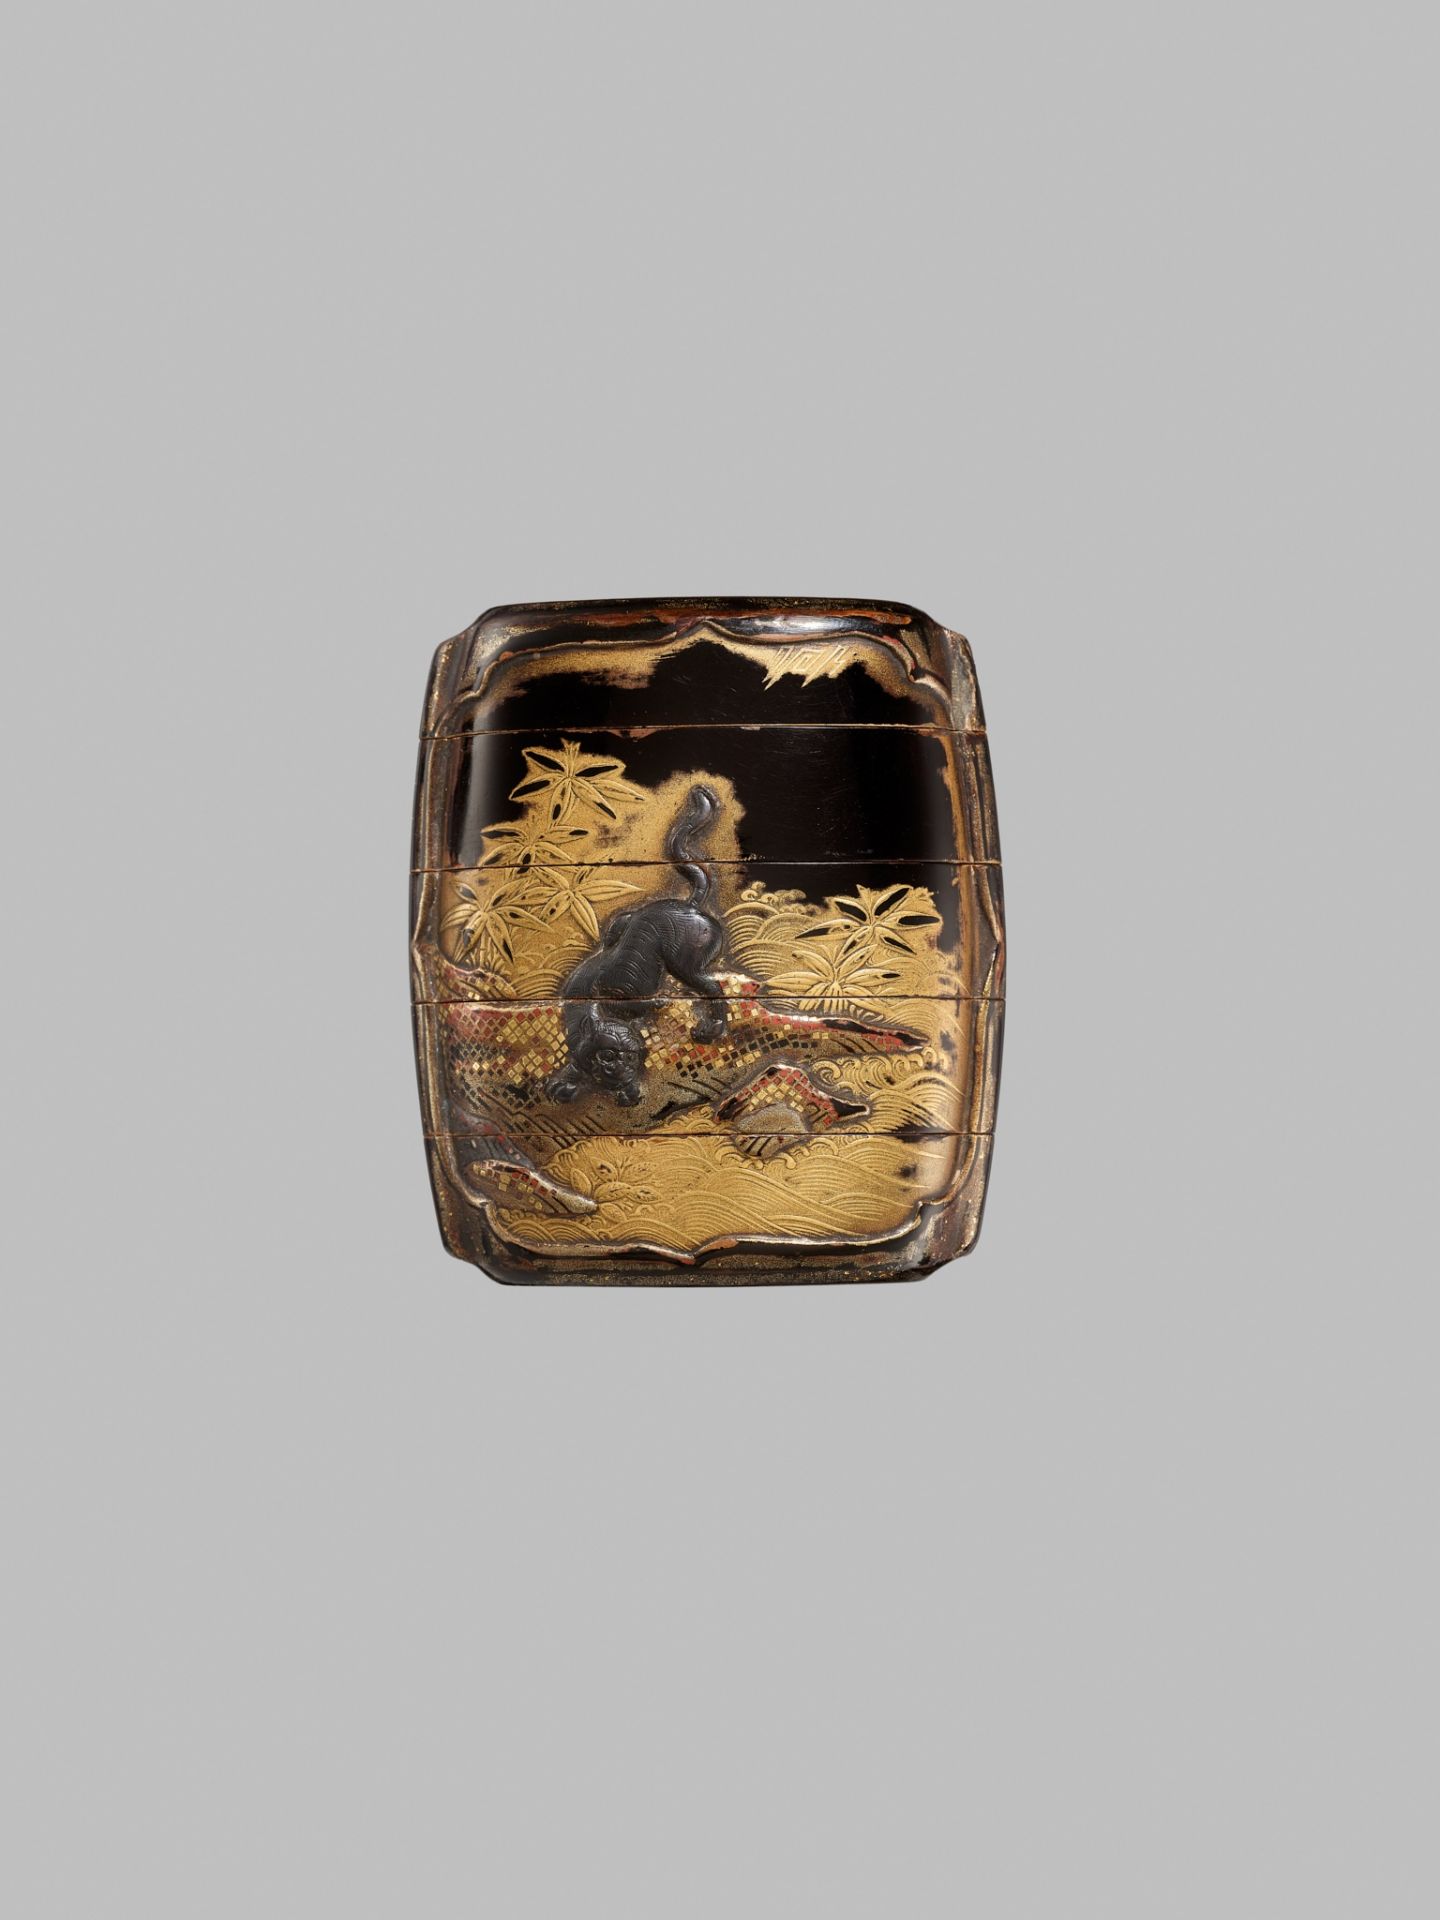 A FINE SILVER-INLAID FOUR-CASE LACQUER INRO DEPICTING A TIGER AND DRAGON - Image 5 of 6